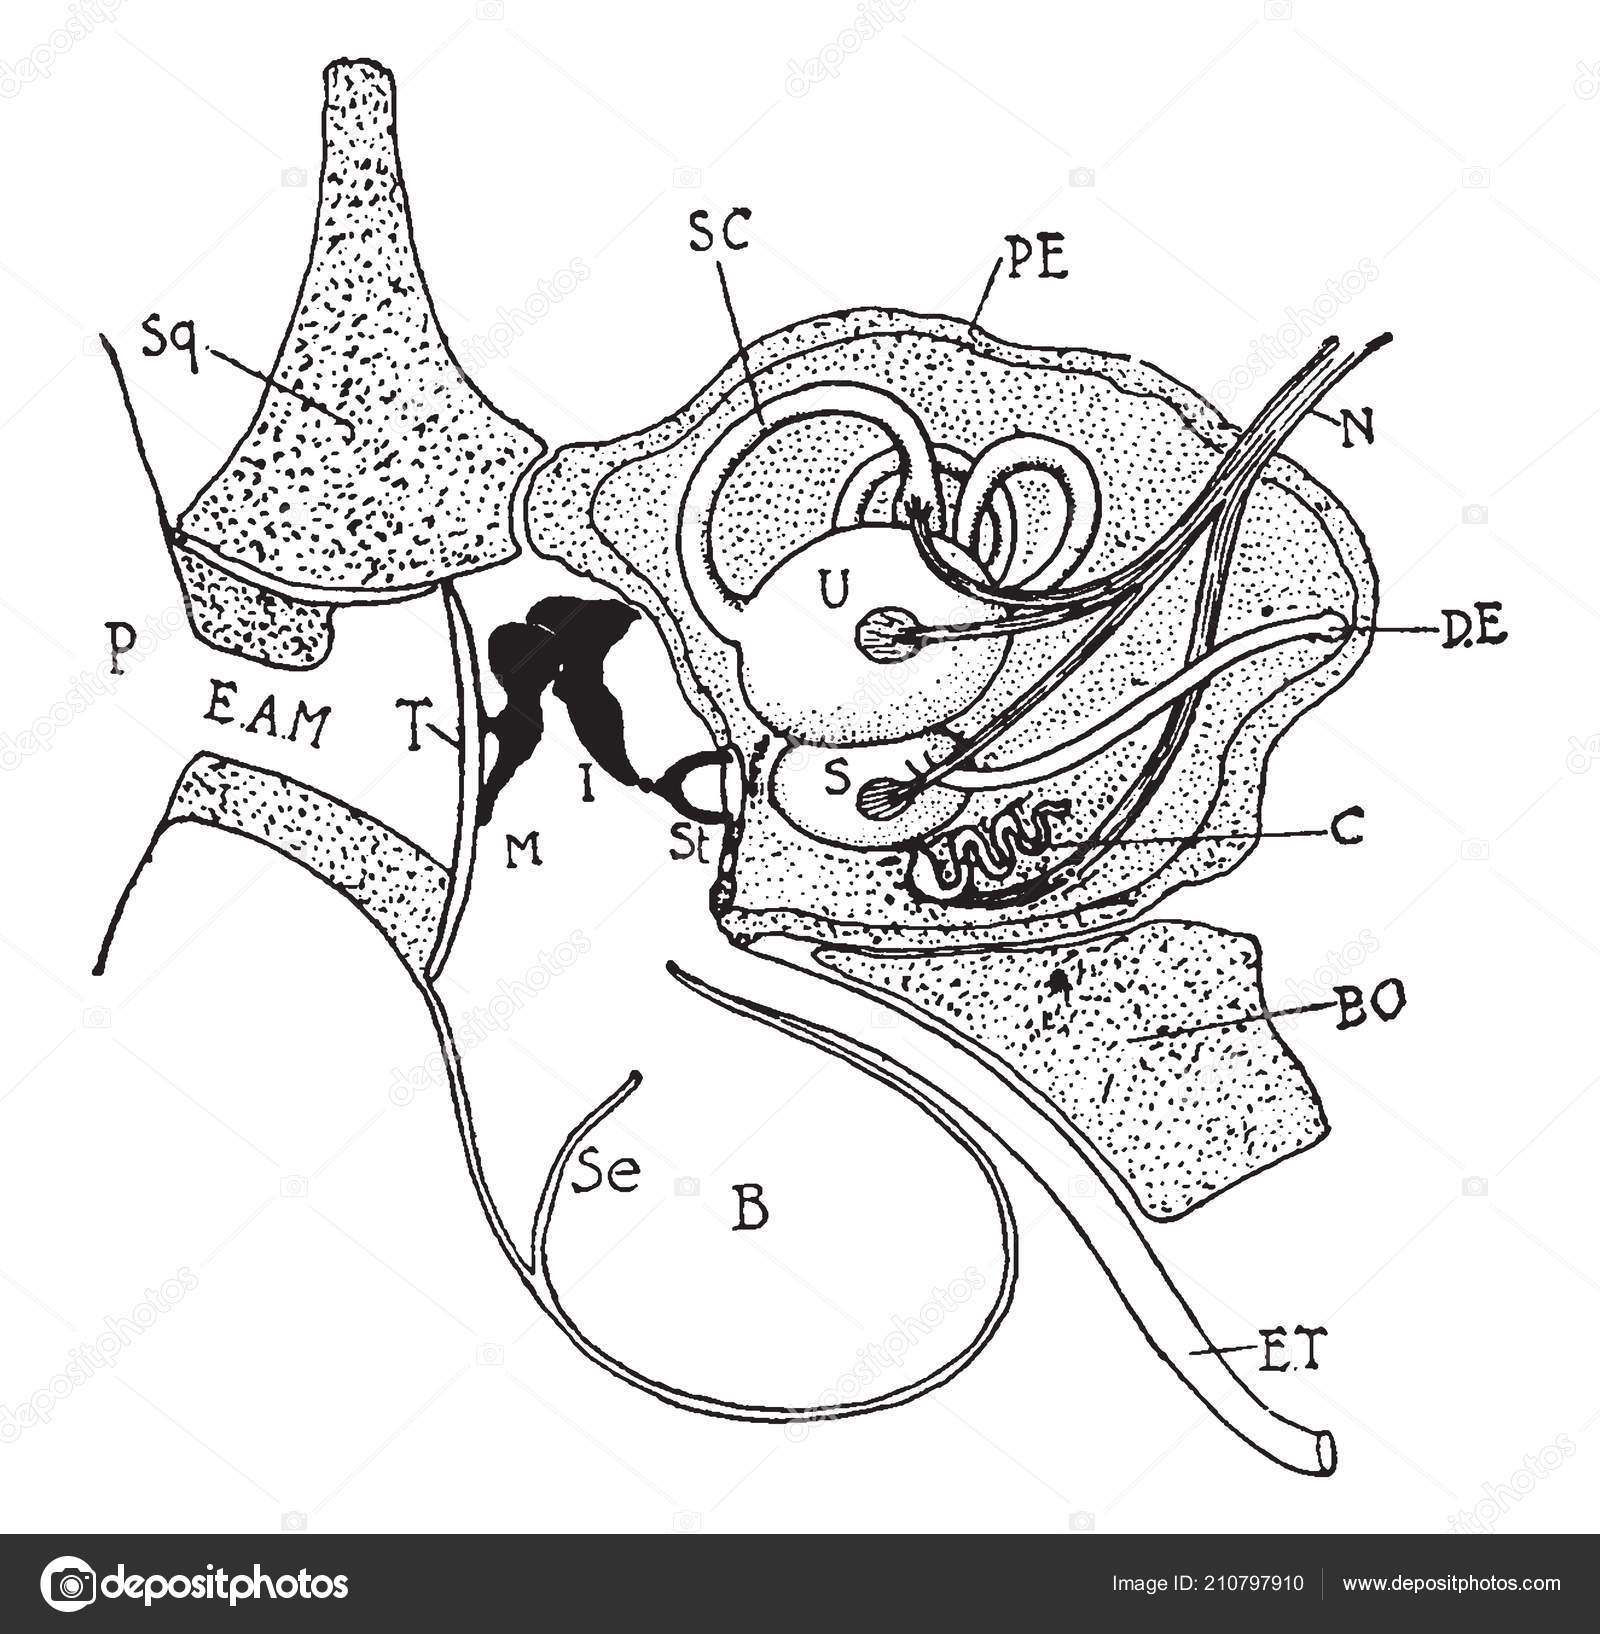 Diagram Of Ear Cat Ear Drawing Diagram Showing Ear Related Parts Young Cat